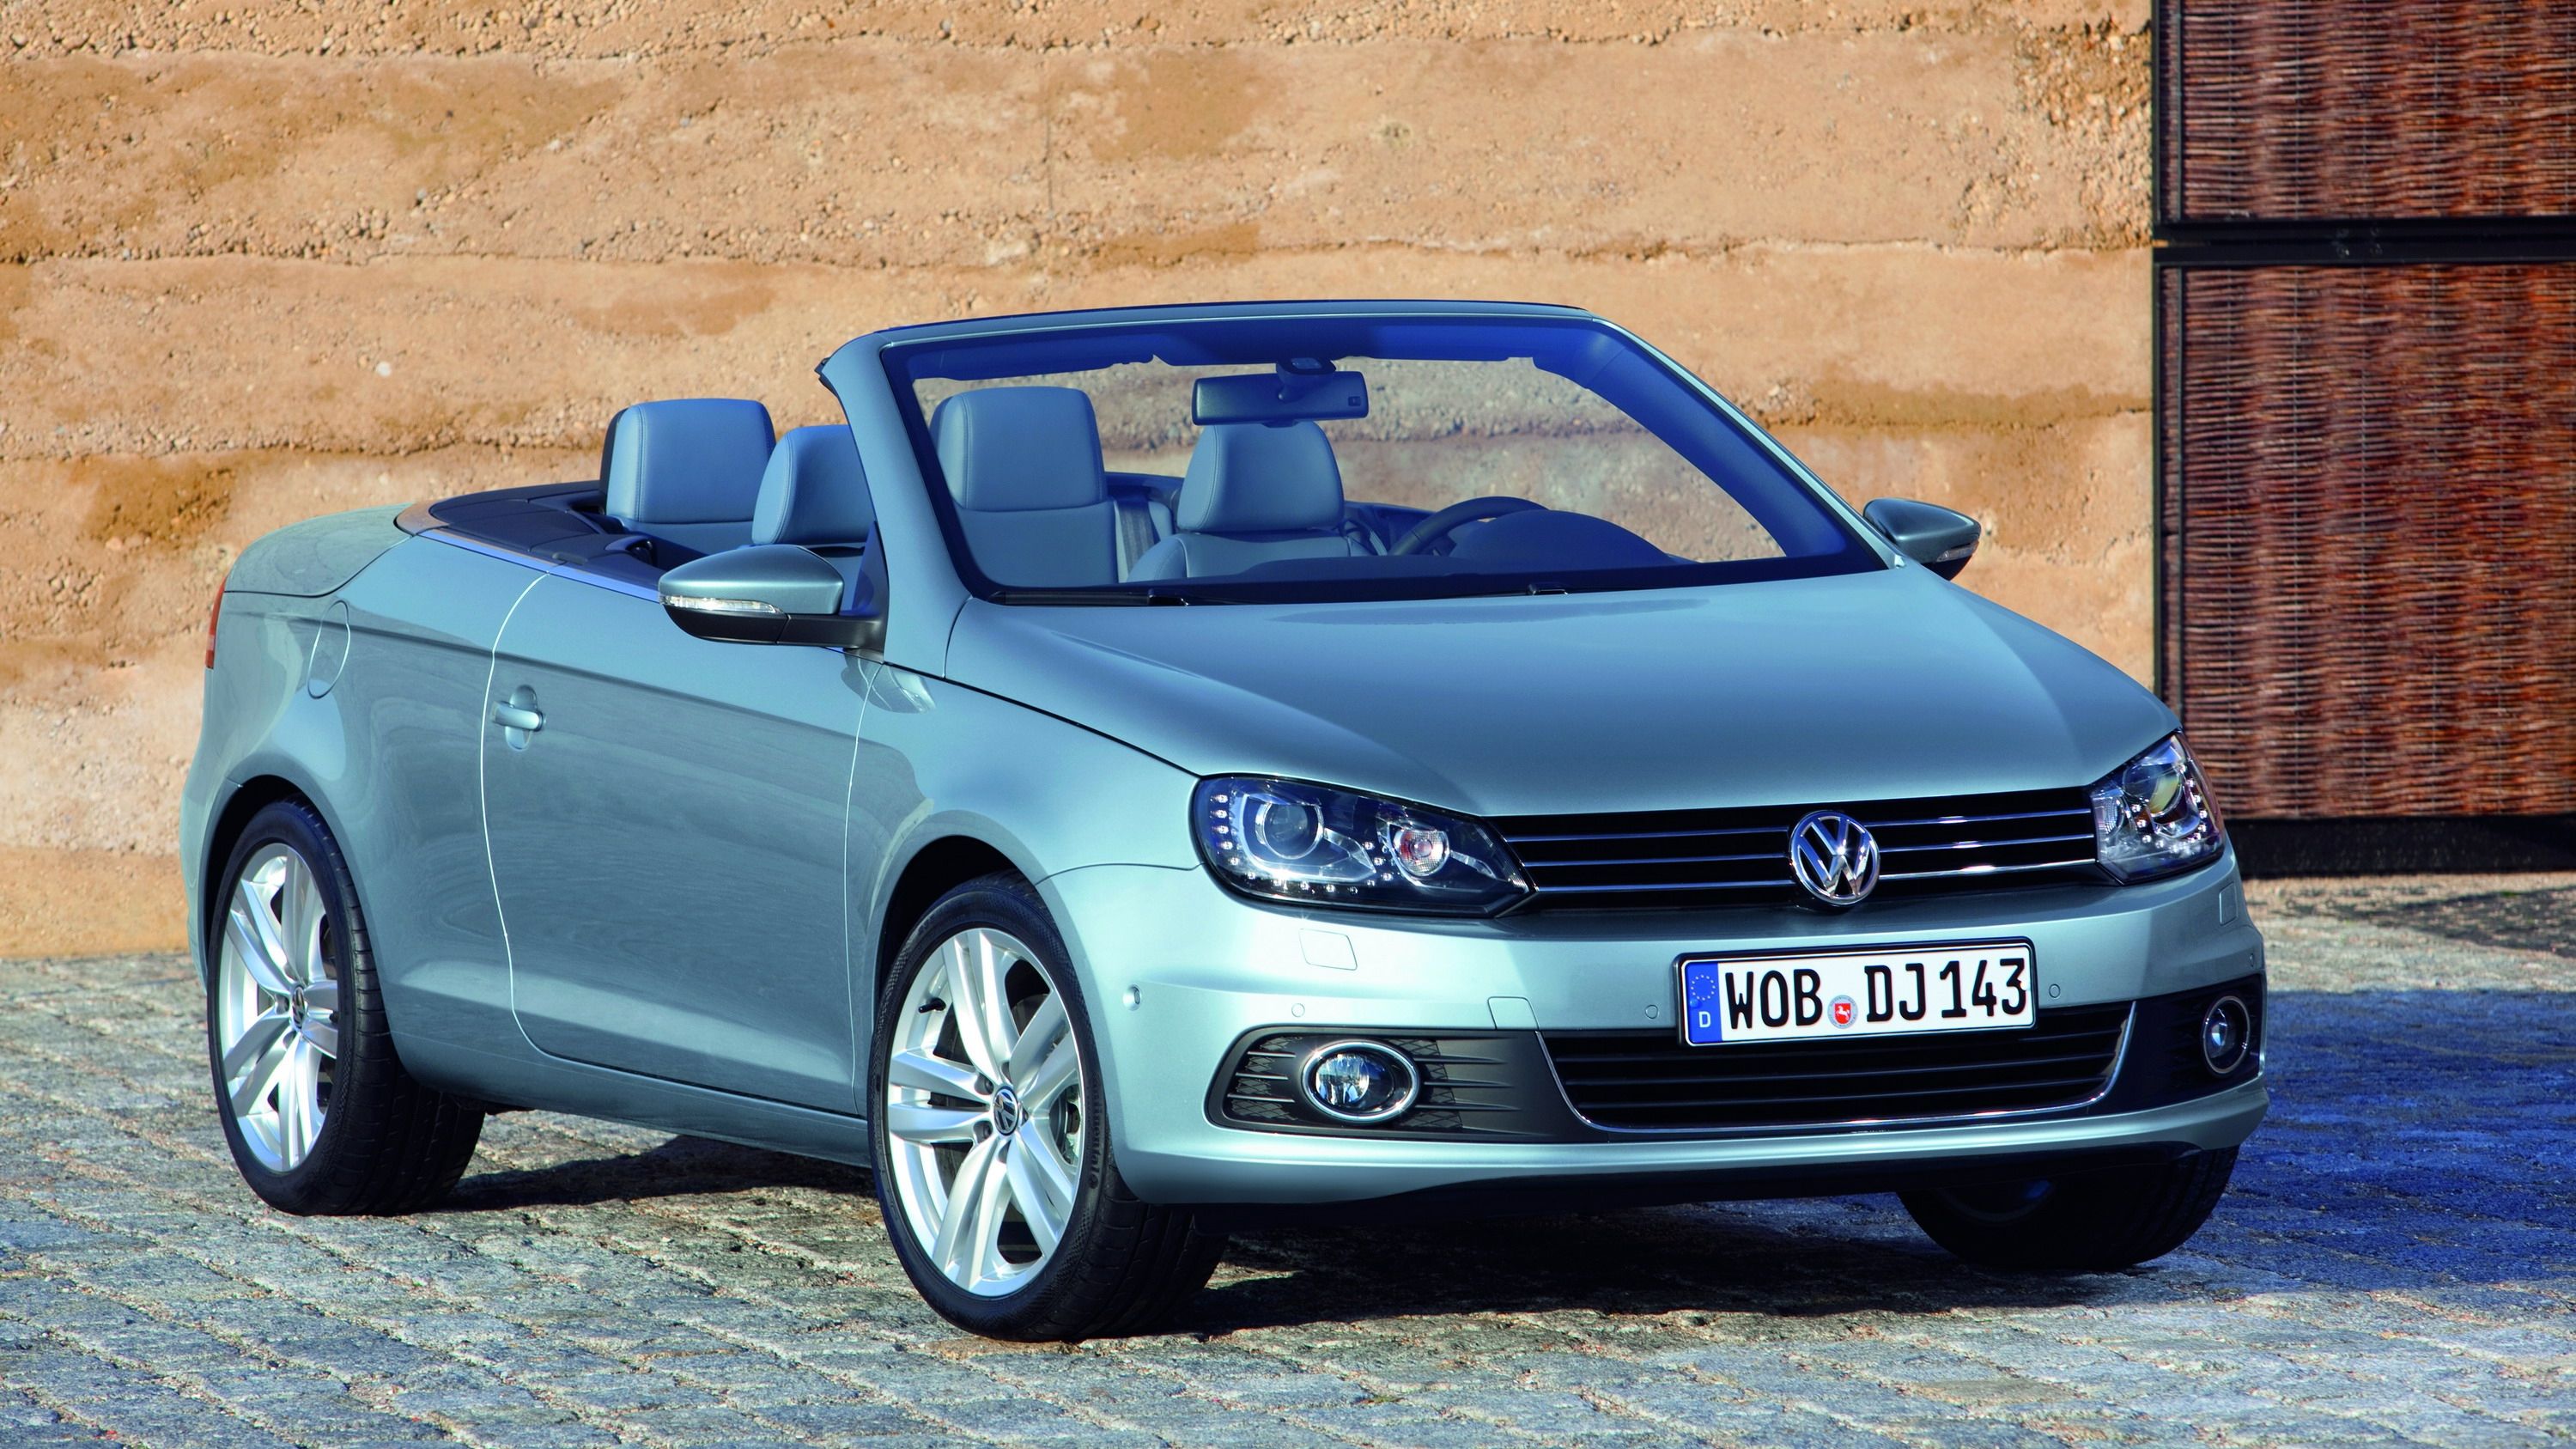 Volkswagen Eos Will Go Out Of Production In May